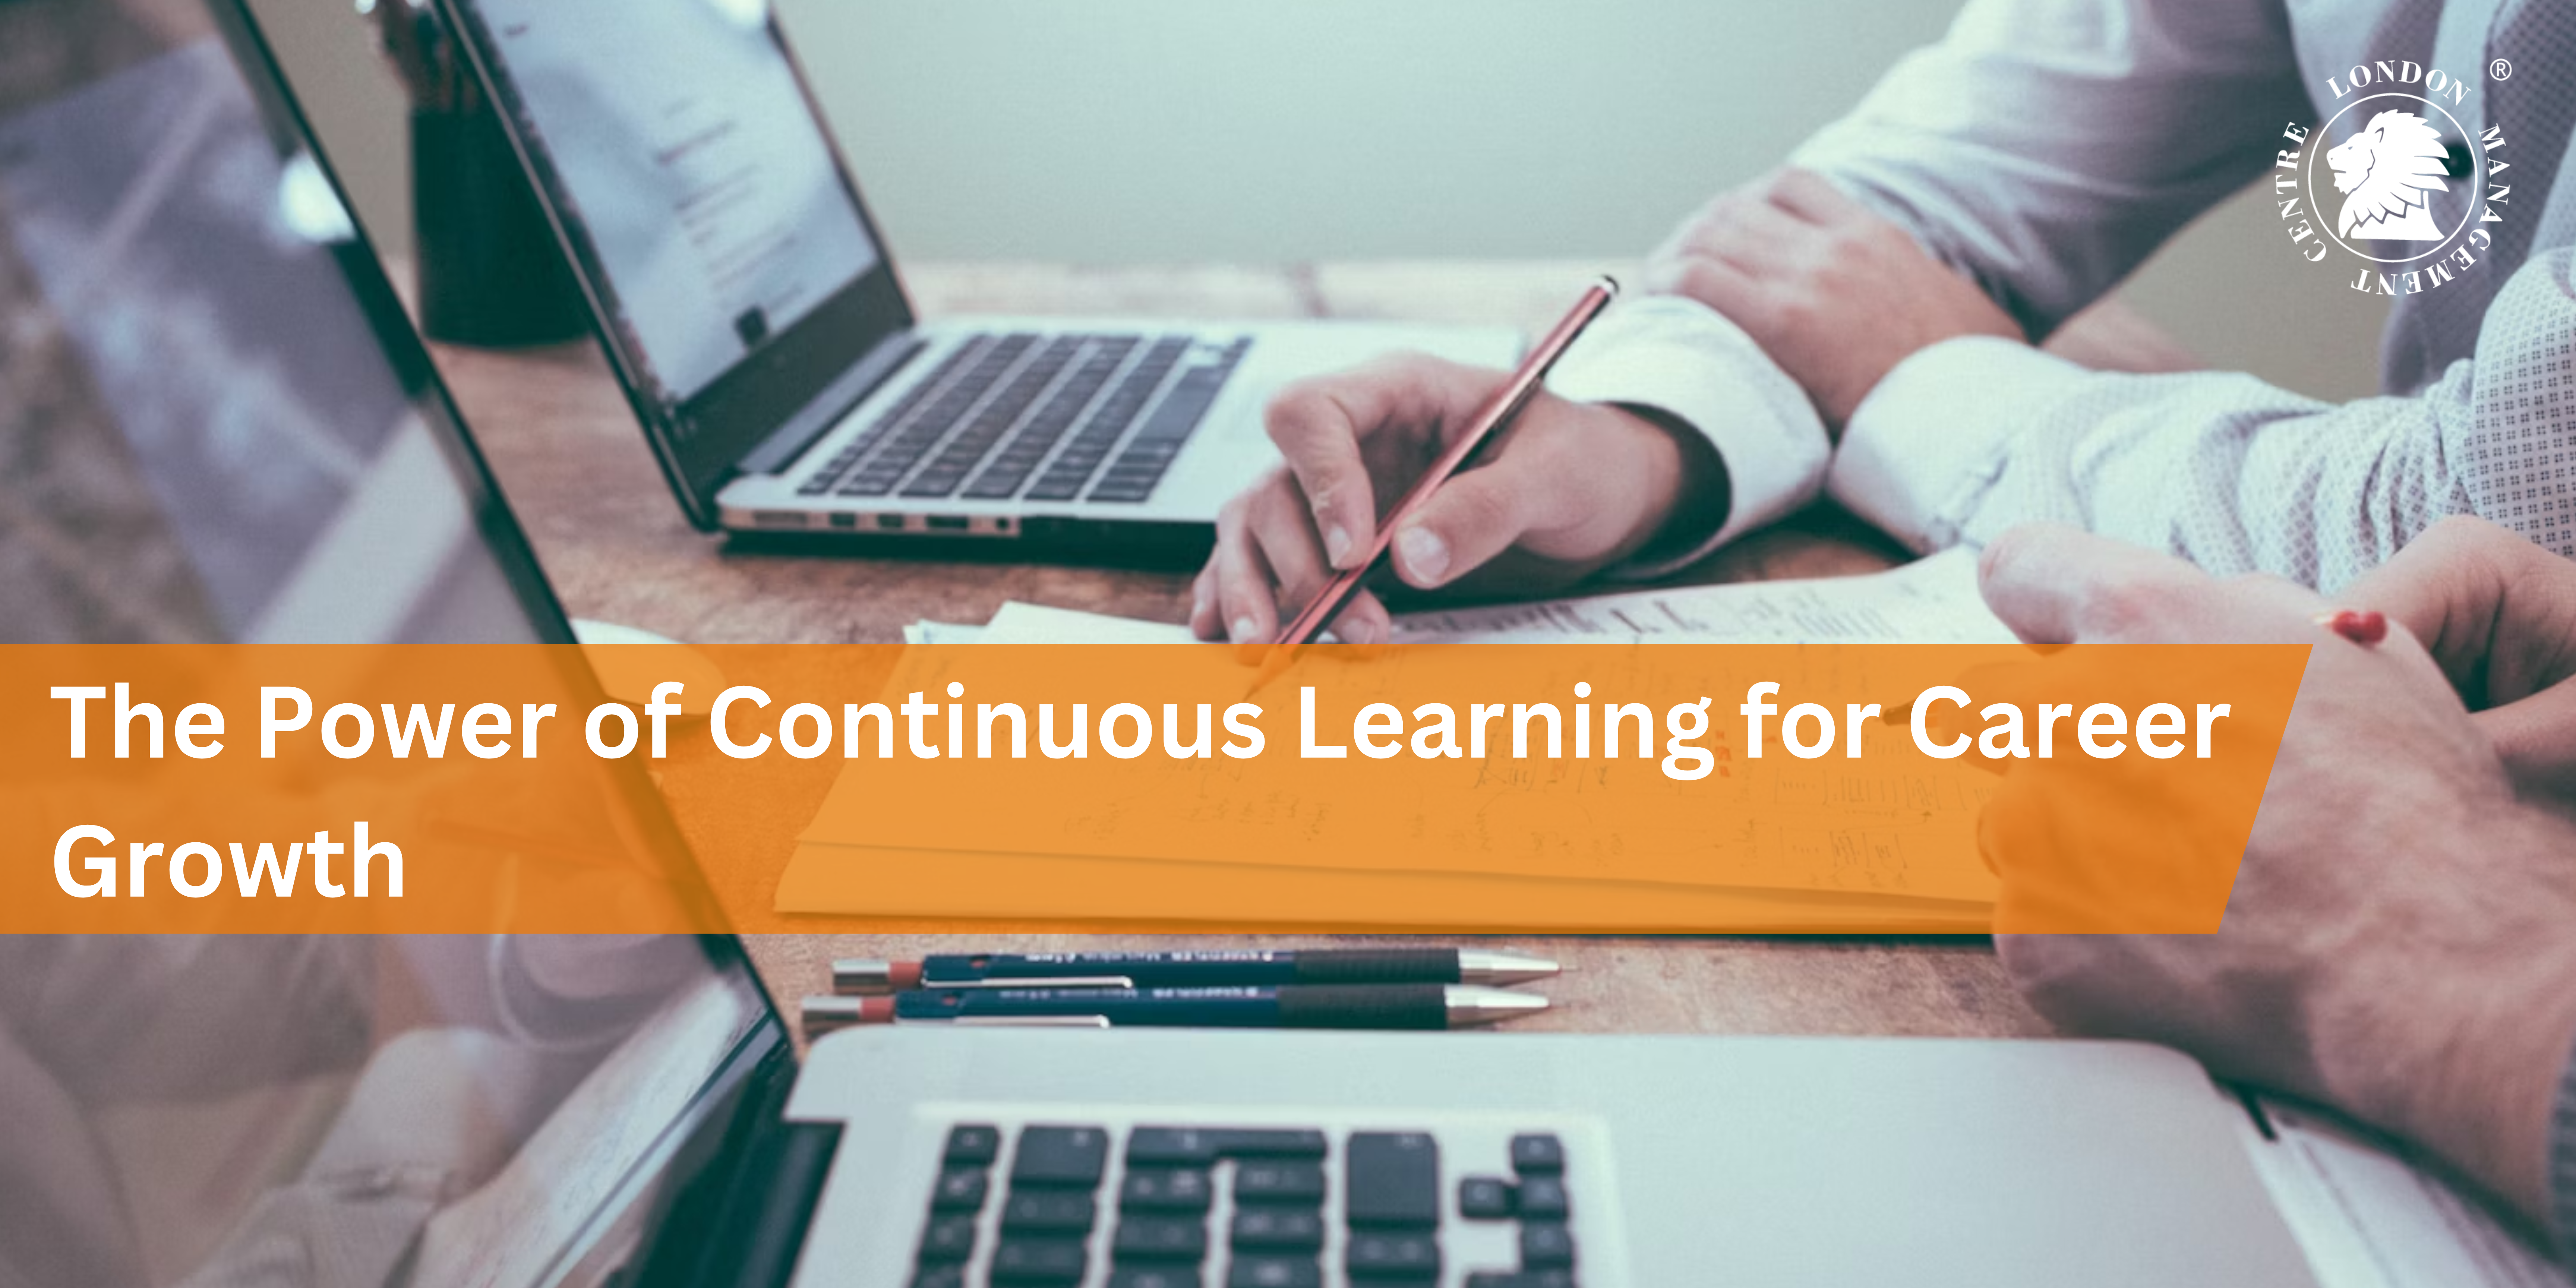 The Power of Continuous Learning for Career Growth